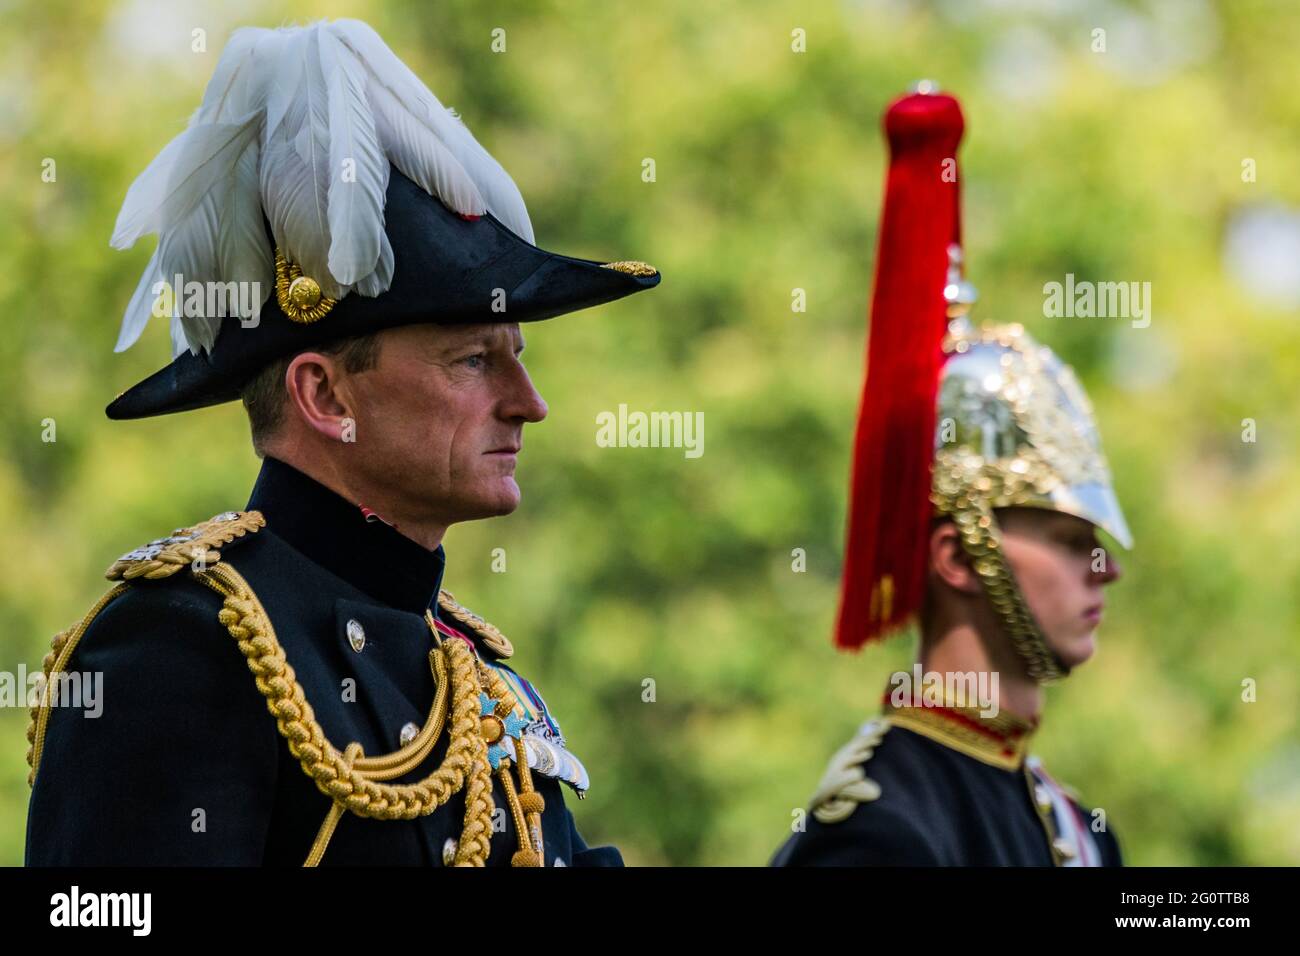 London, UK. 3 Jun 2021. Major General Chris Ghika (pictured) - The Major General's Inspection of the Household Cavalry Mounted Regiment in Hyde Park. Around 170 horses and personnel of the Household Cavalry Mounted Regiment accompanied by the mounted band of the Household Cavalry with their shire Drum Horses. The test must be passed in order to participate in upcoming State Ceremonial duties and, for the first time since 2019, that includes the honour of taking part in this year's Queen's Birthday Parade. An inspection of horsemanship, turnout and State Ceremonial uniform will be made by Major Stock Photo